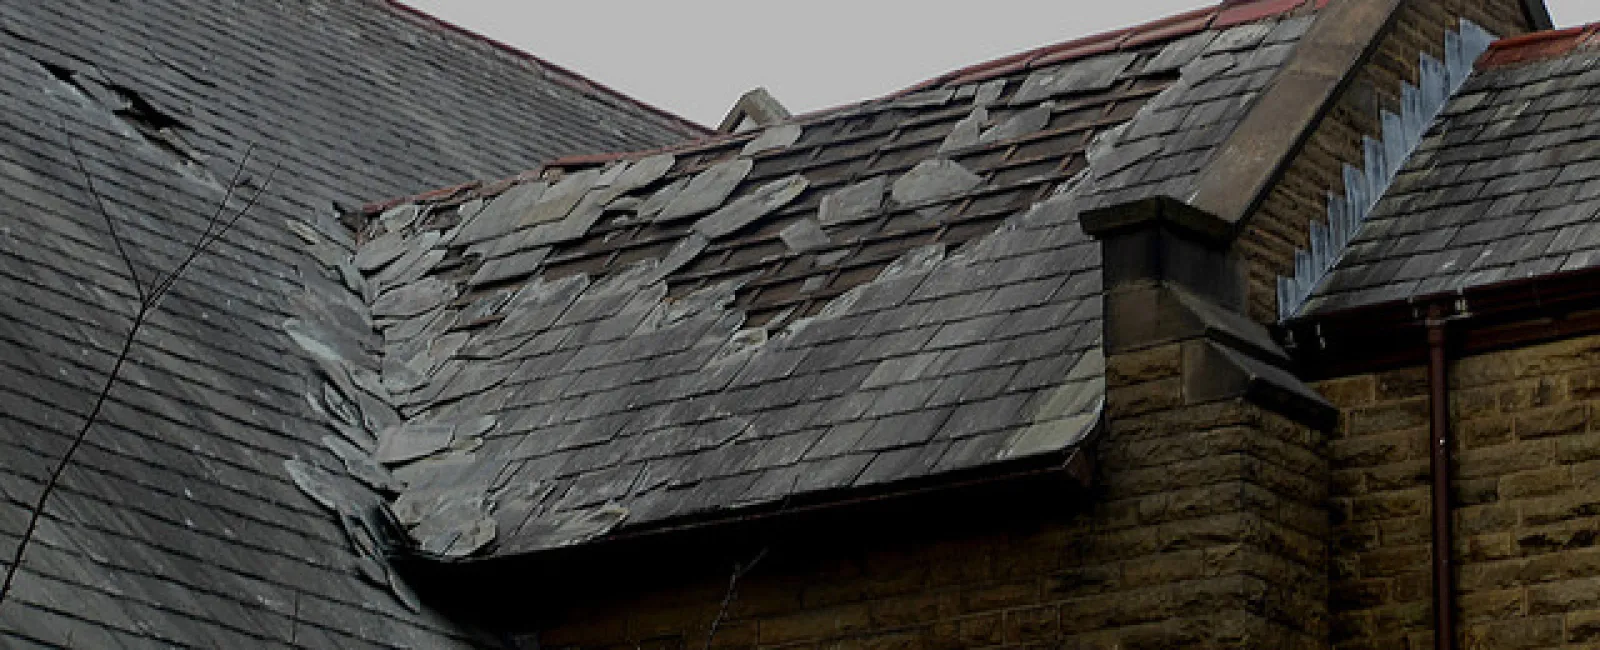 Roof Insurance: How Does It Work?